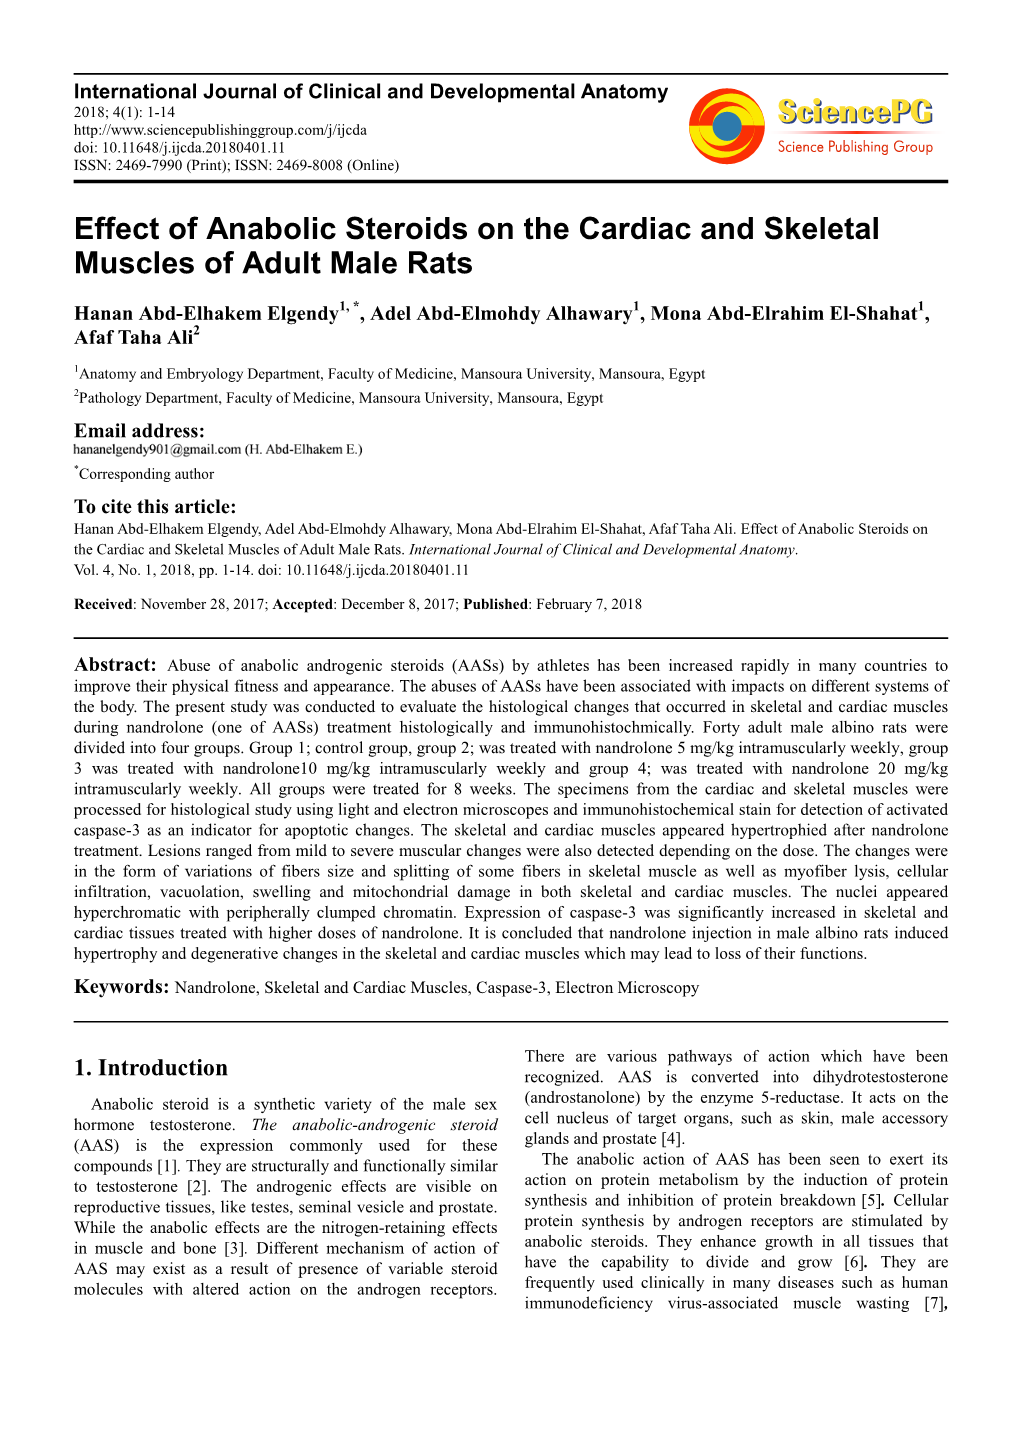 Effect of Anabolic Steroids on the Cardiac and Skeletal Muscles of Adult Male Rats